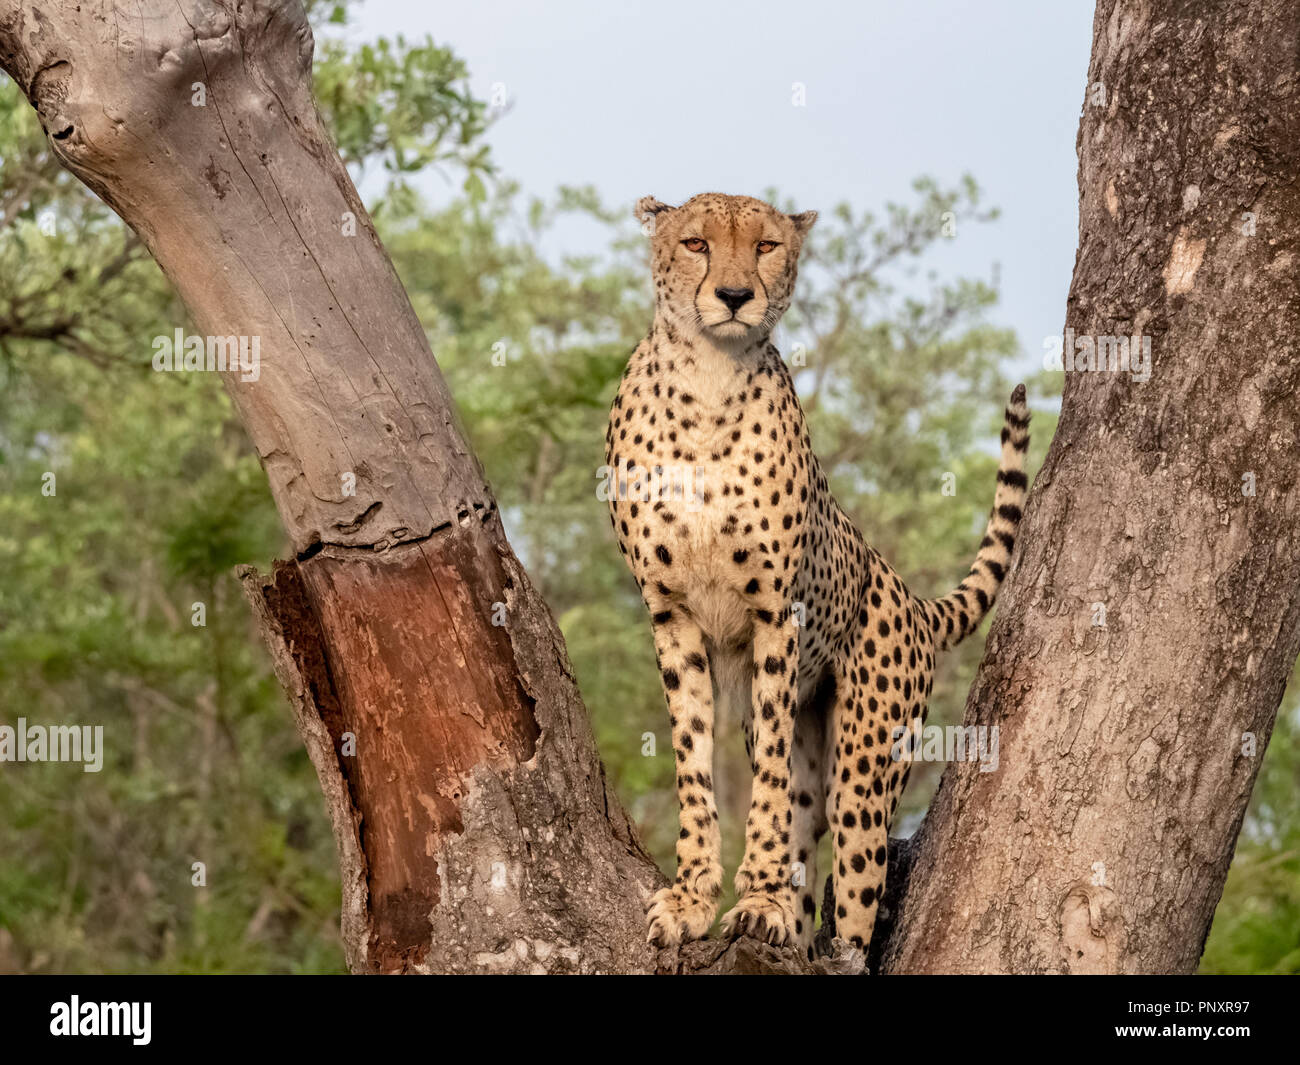 A cheetah in a tree on a safari in South Africa. Stock Photo